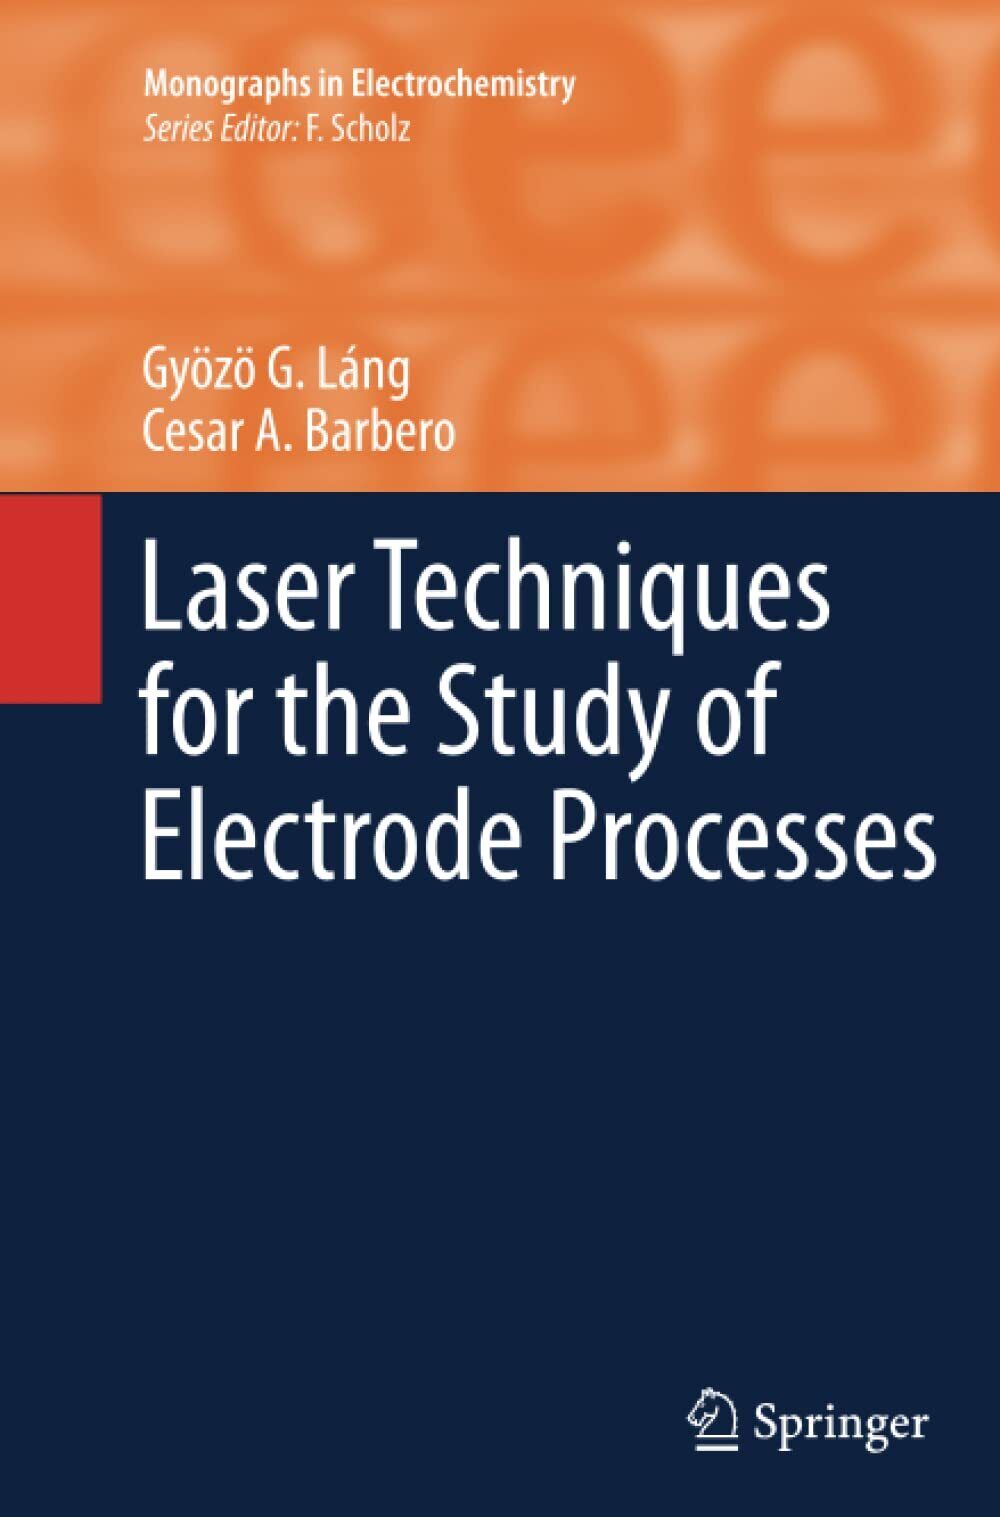 Laser Techniques for the Study of Electrode Processes - Springer, 2014